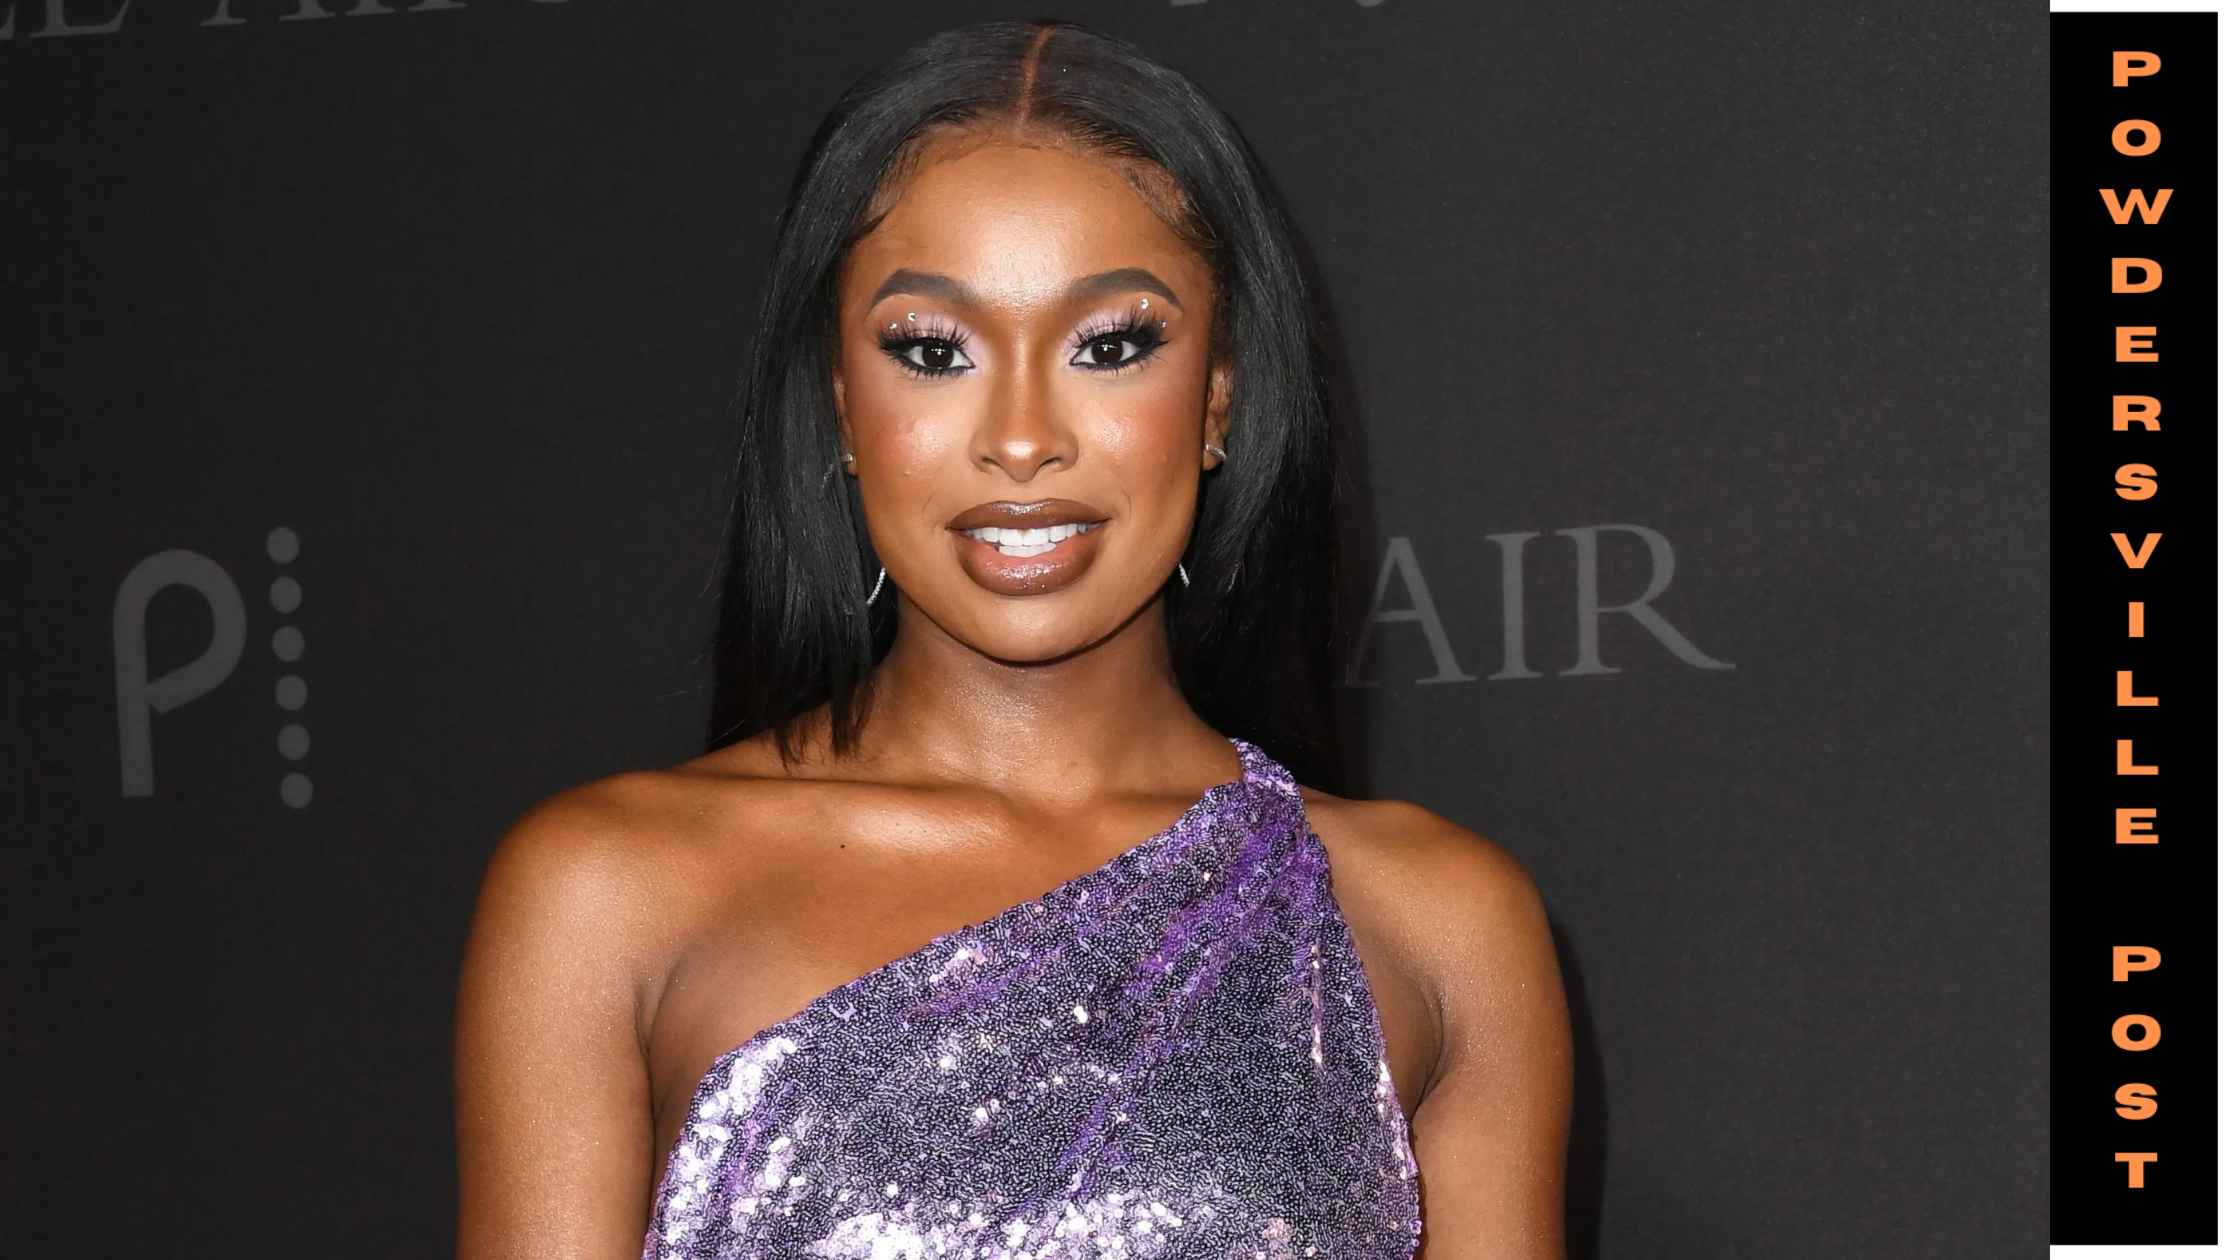 How Old Is Coco Jones What Is Her Net Worth When Did She Start Her Career Things To Know About The Most Incredible Songwriter!